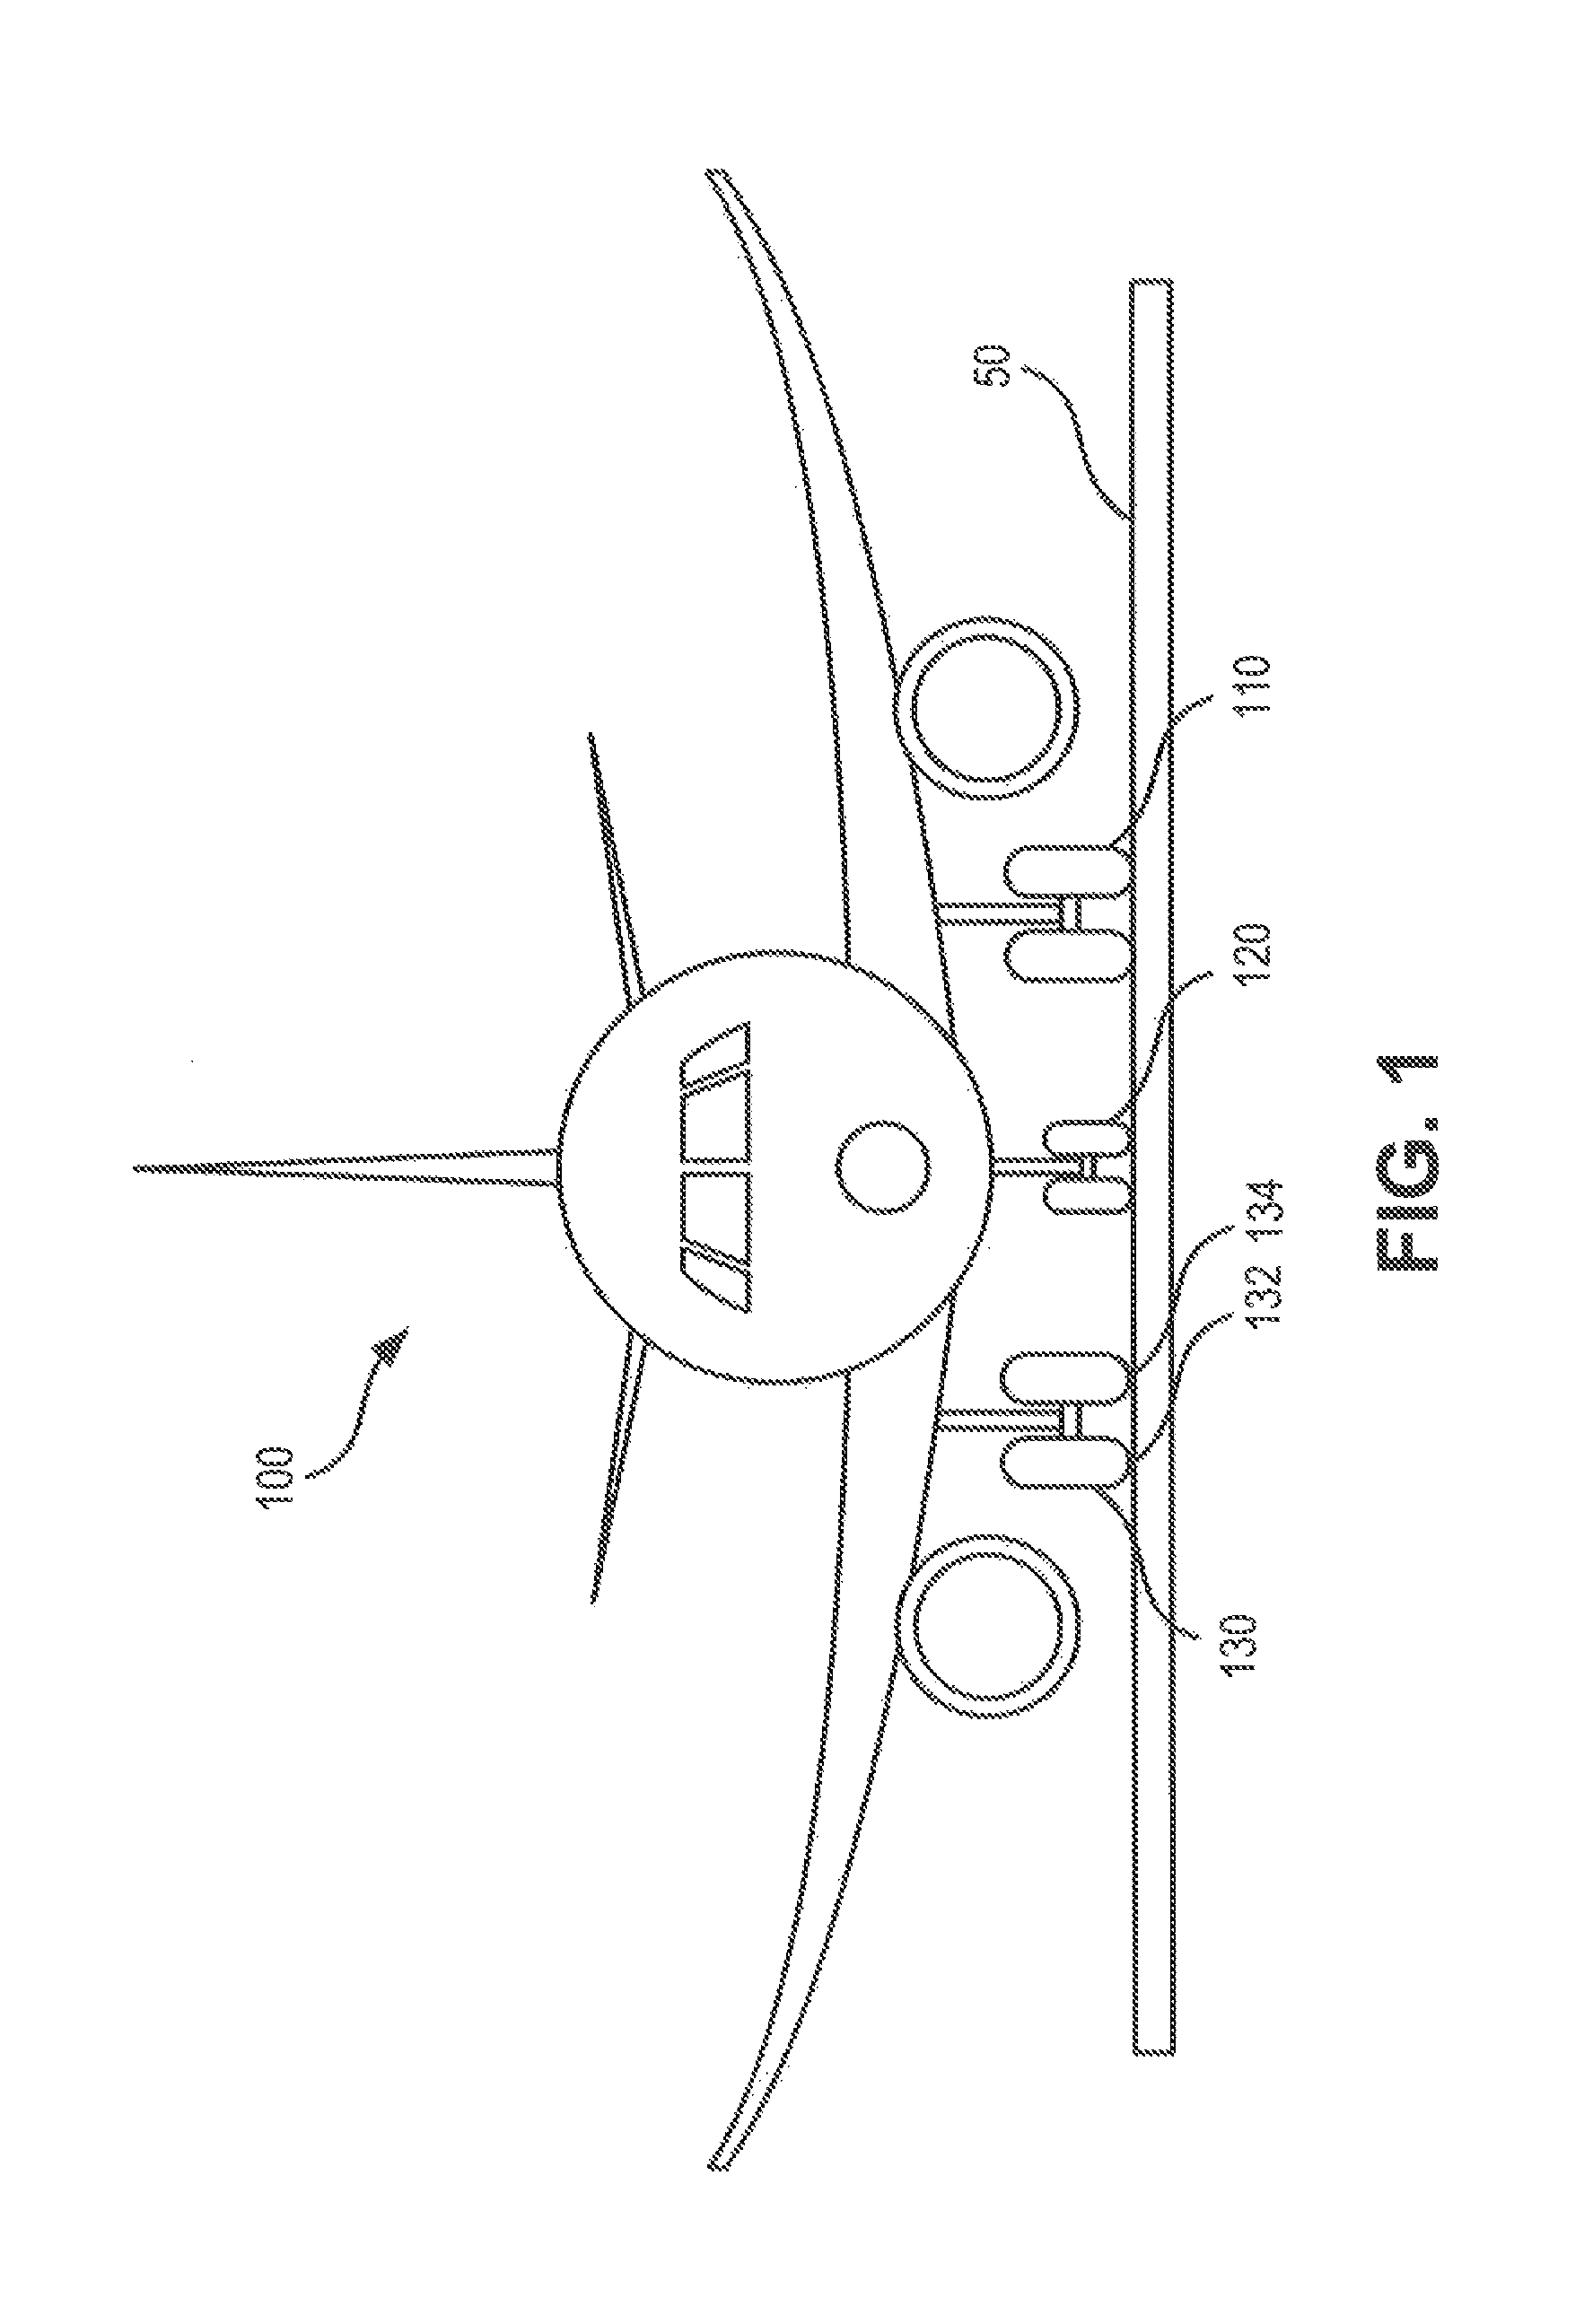 Tire inflate/deflate indication method and system